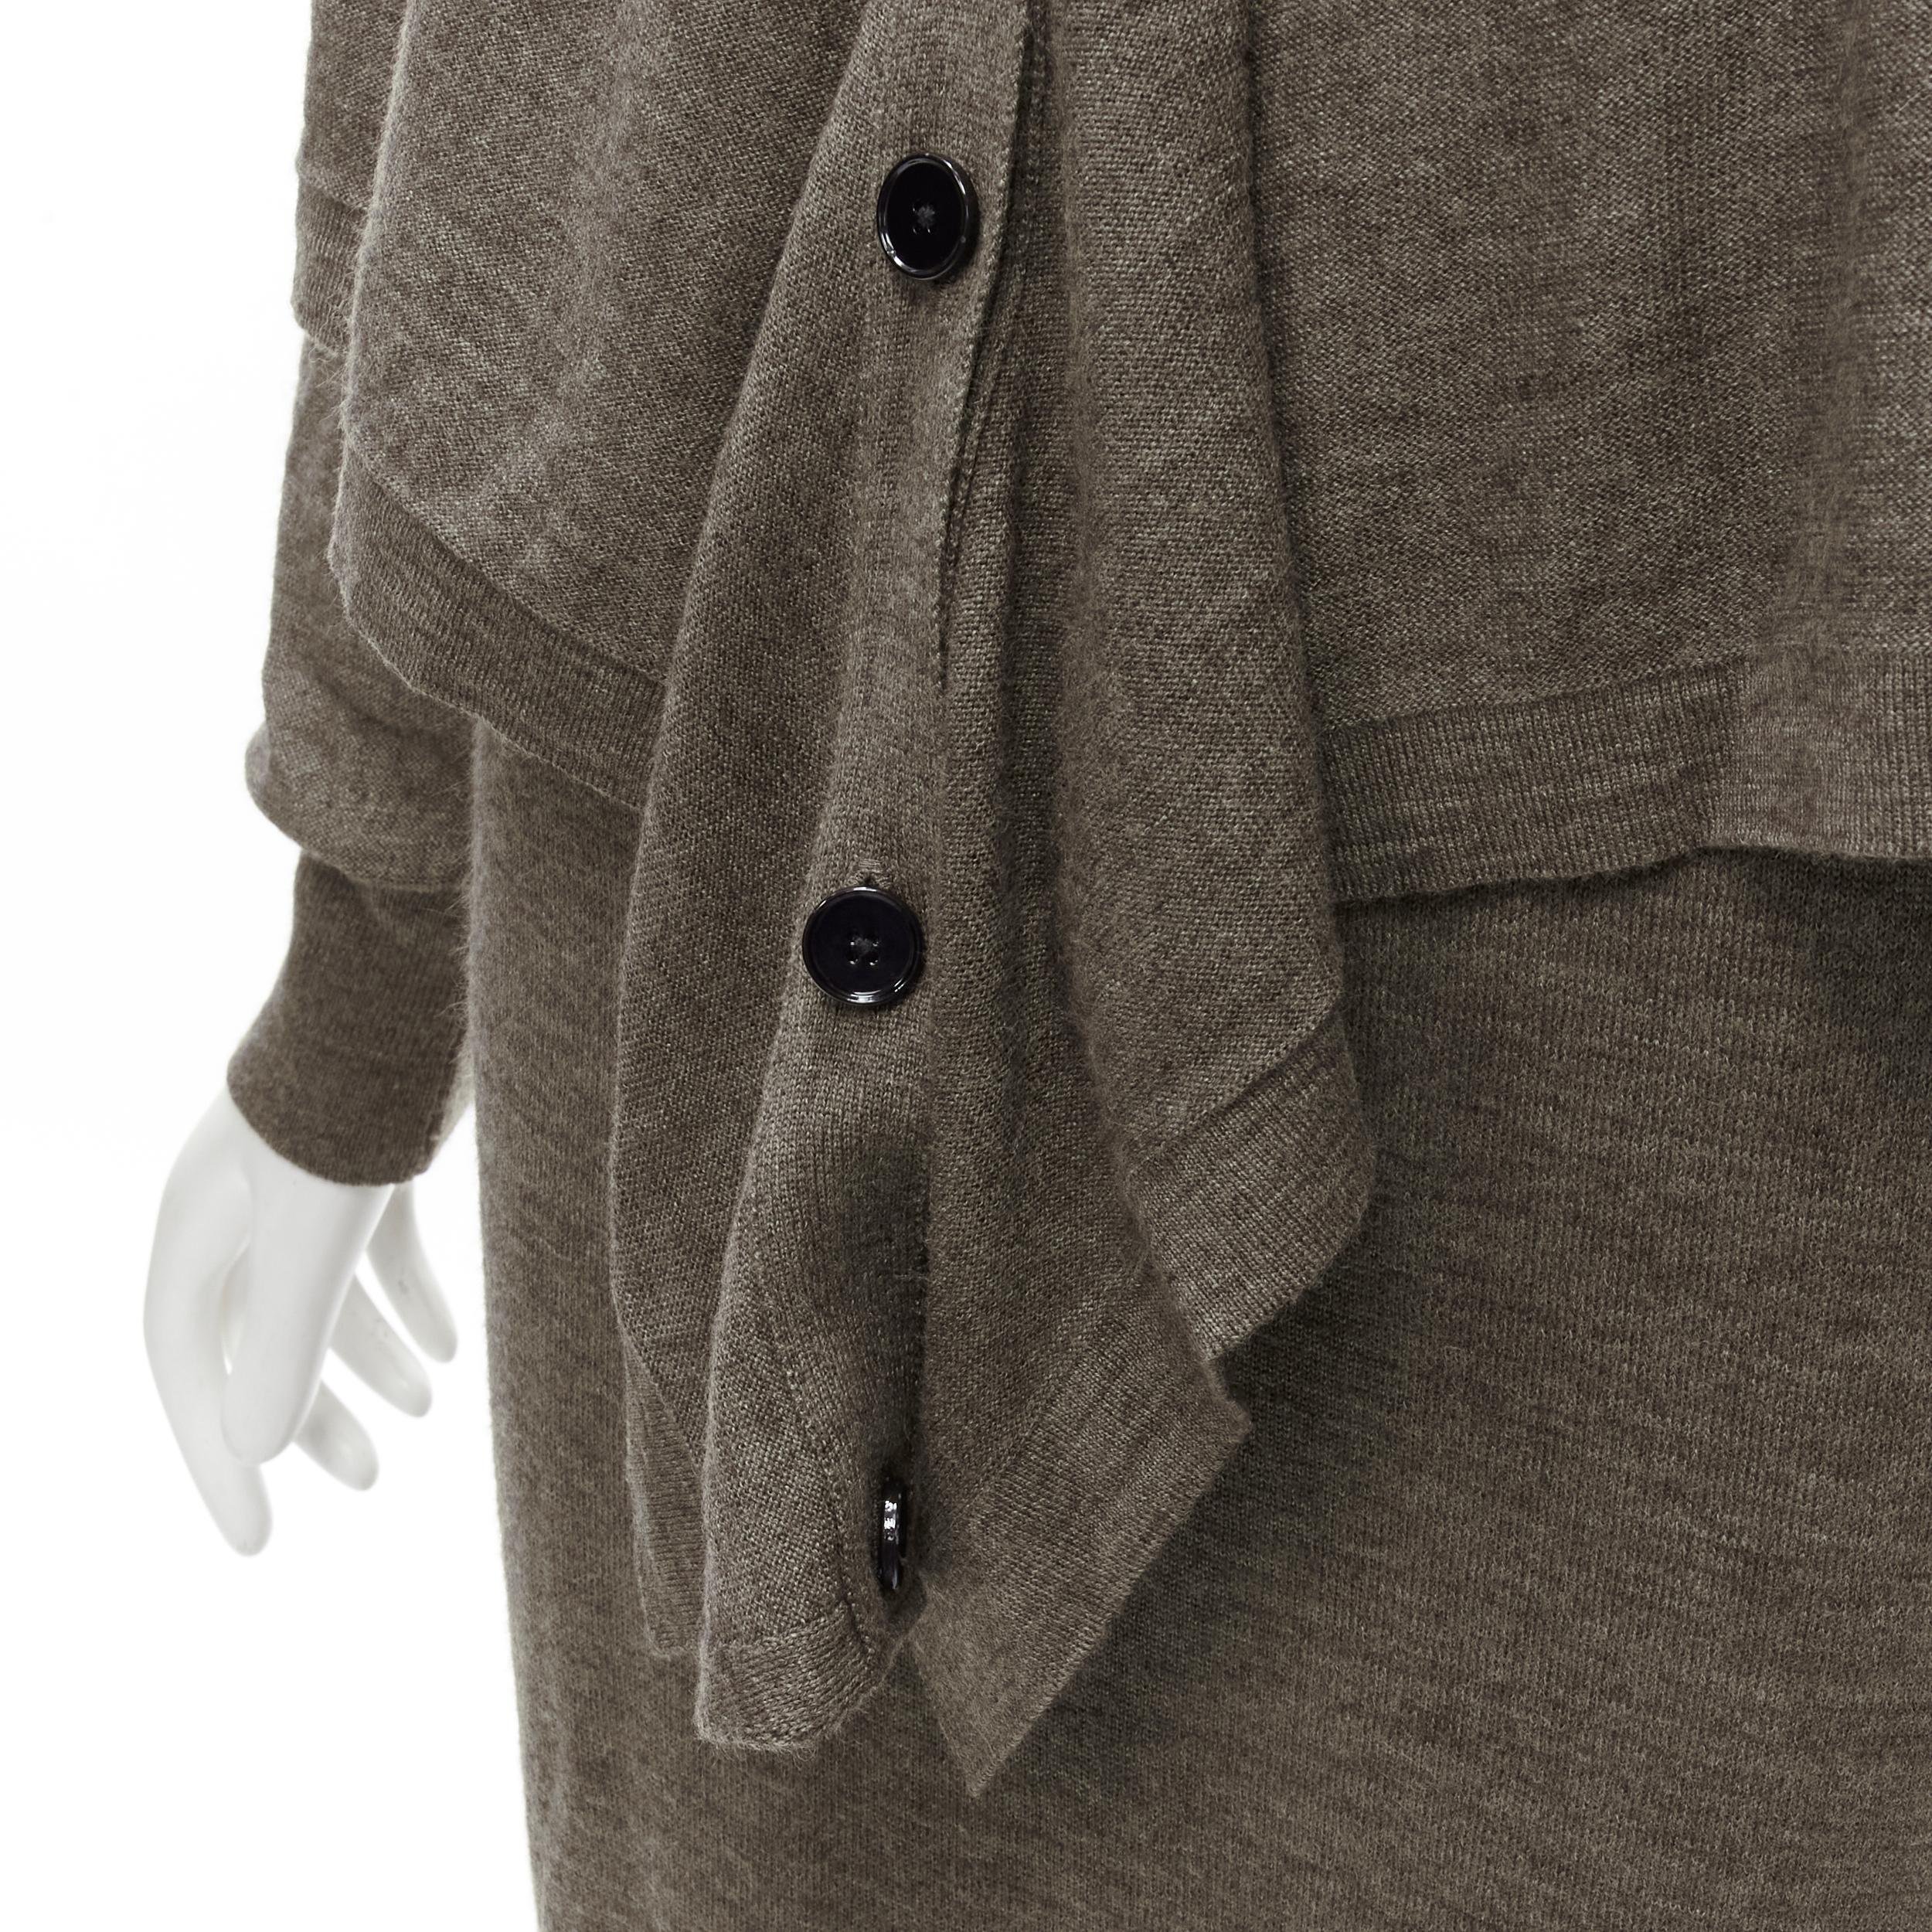 LEMAIRE brown merino wool blend tie front cardigan sweater dress XS
Brand: Lemaire
Material: Merino Wool
Color: Brown
Pattern: Solid
Extra Detail: Cardigan design tie front design
Made in: Portugal

CONDITION:
Condition: Excellent, this item was